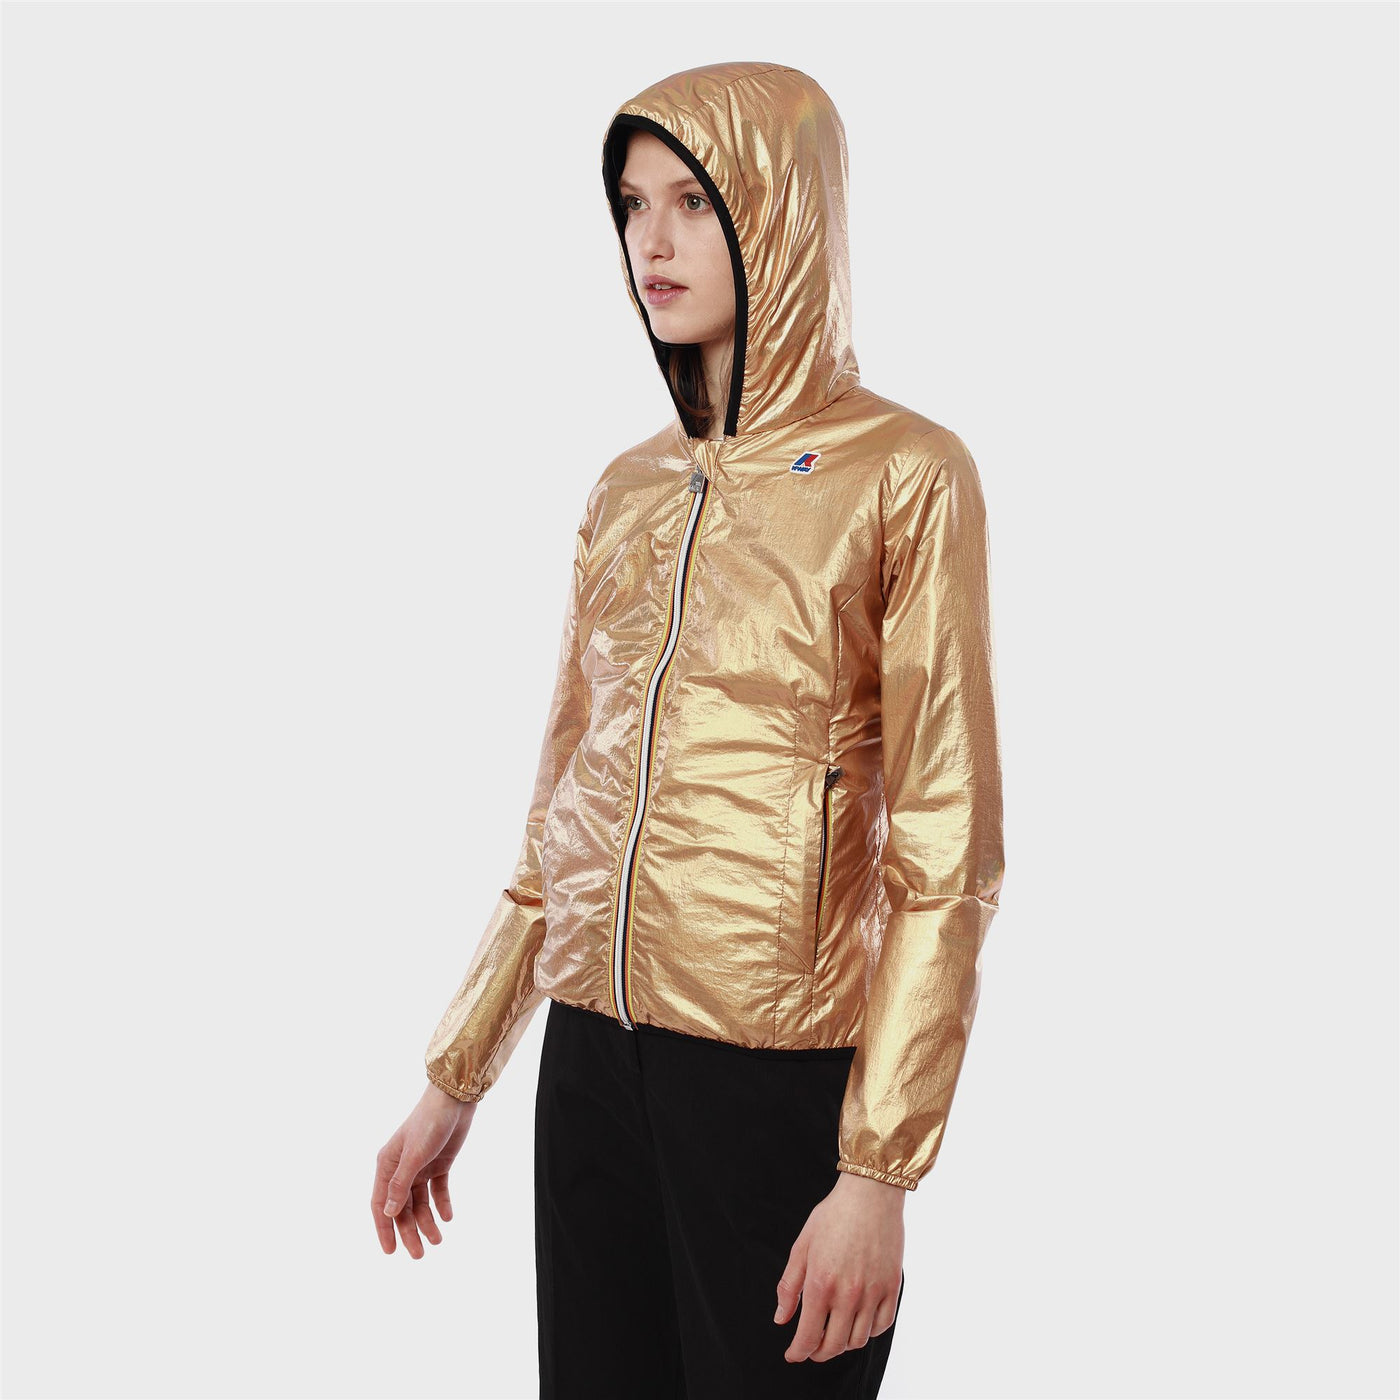 Jackets Woman LILY PLUS.2 DOUBLE METAL Short GOLD METAL - BLACK PURE Dressed Side (jpg Rgb)		